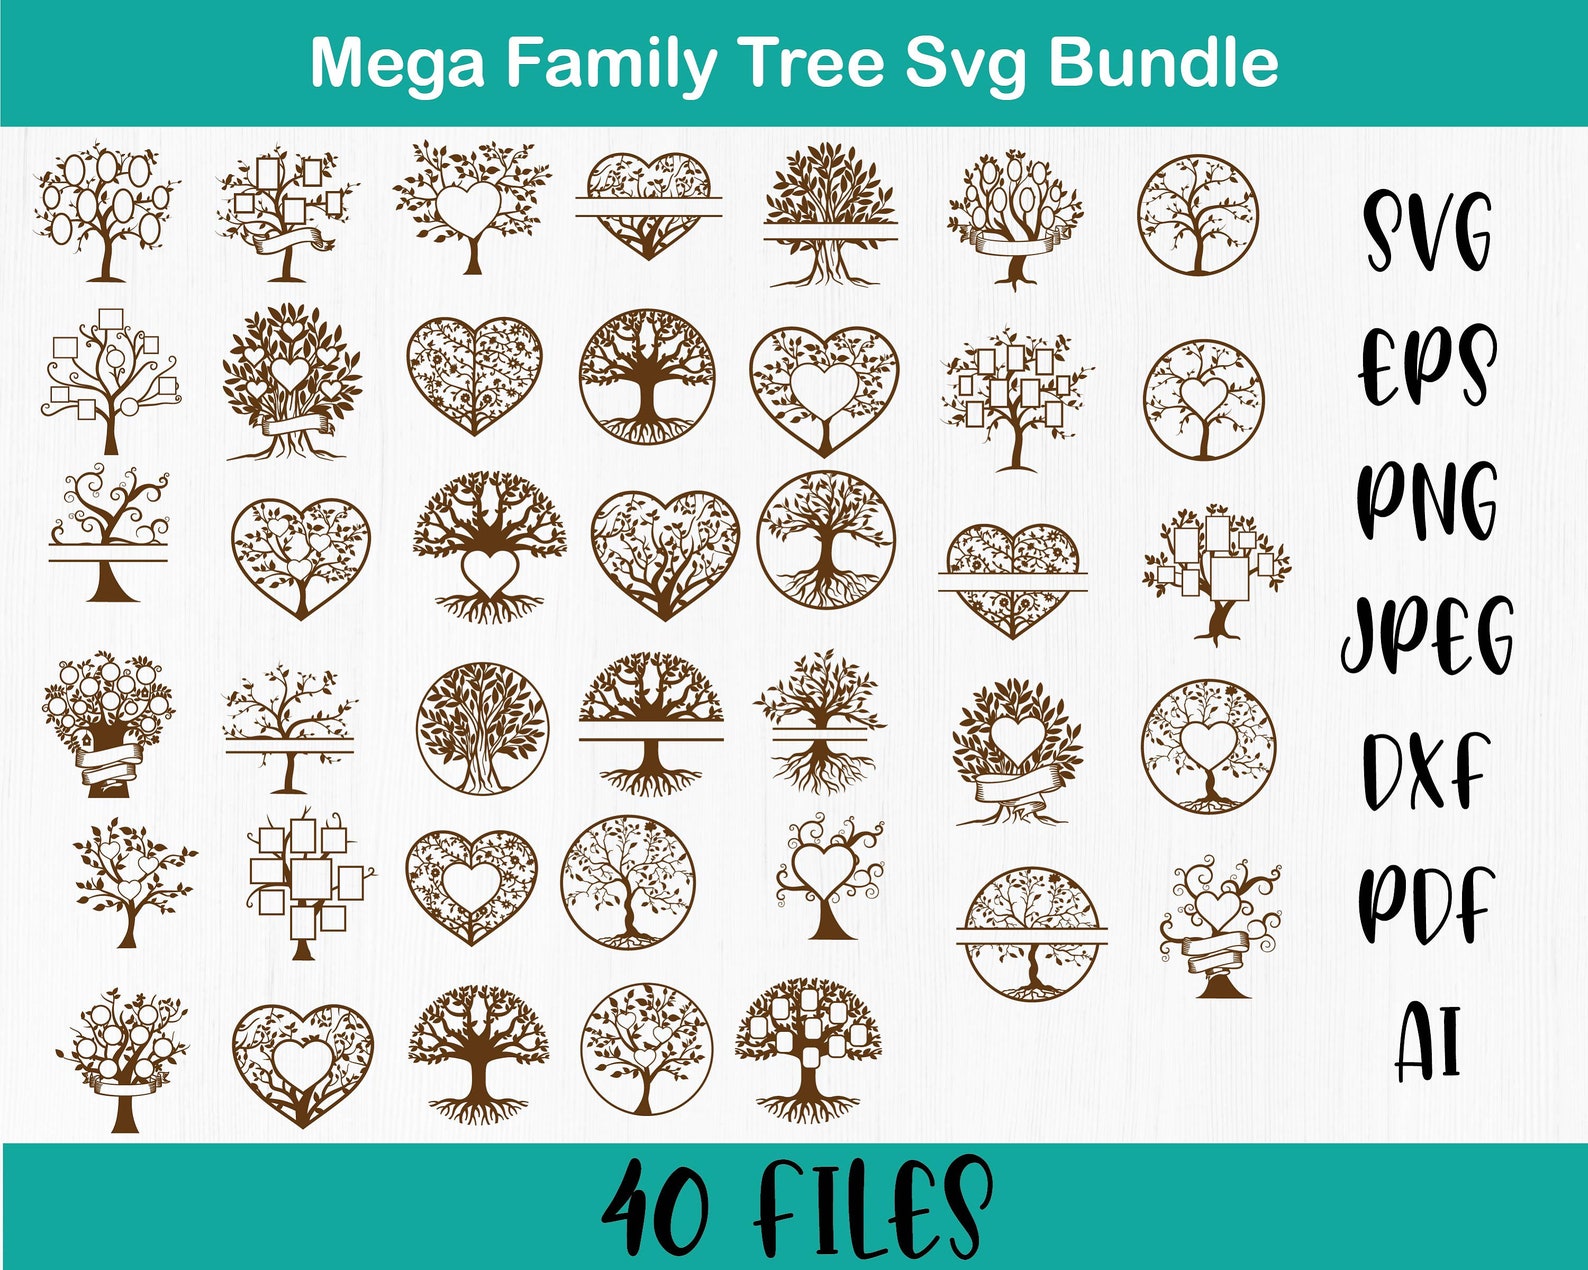 Main preview of Mega Family Tree SVG Bundle for your design.